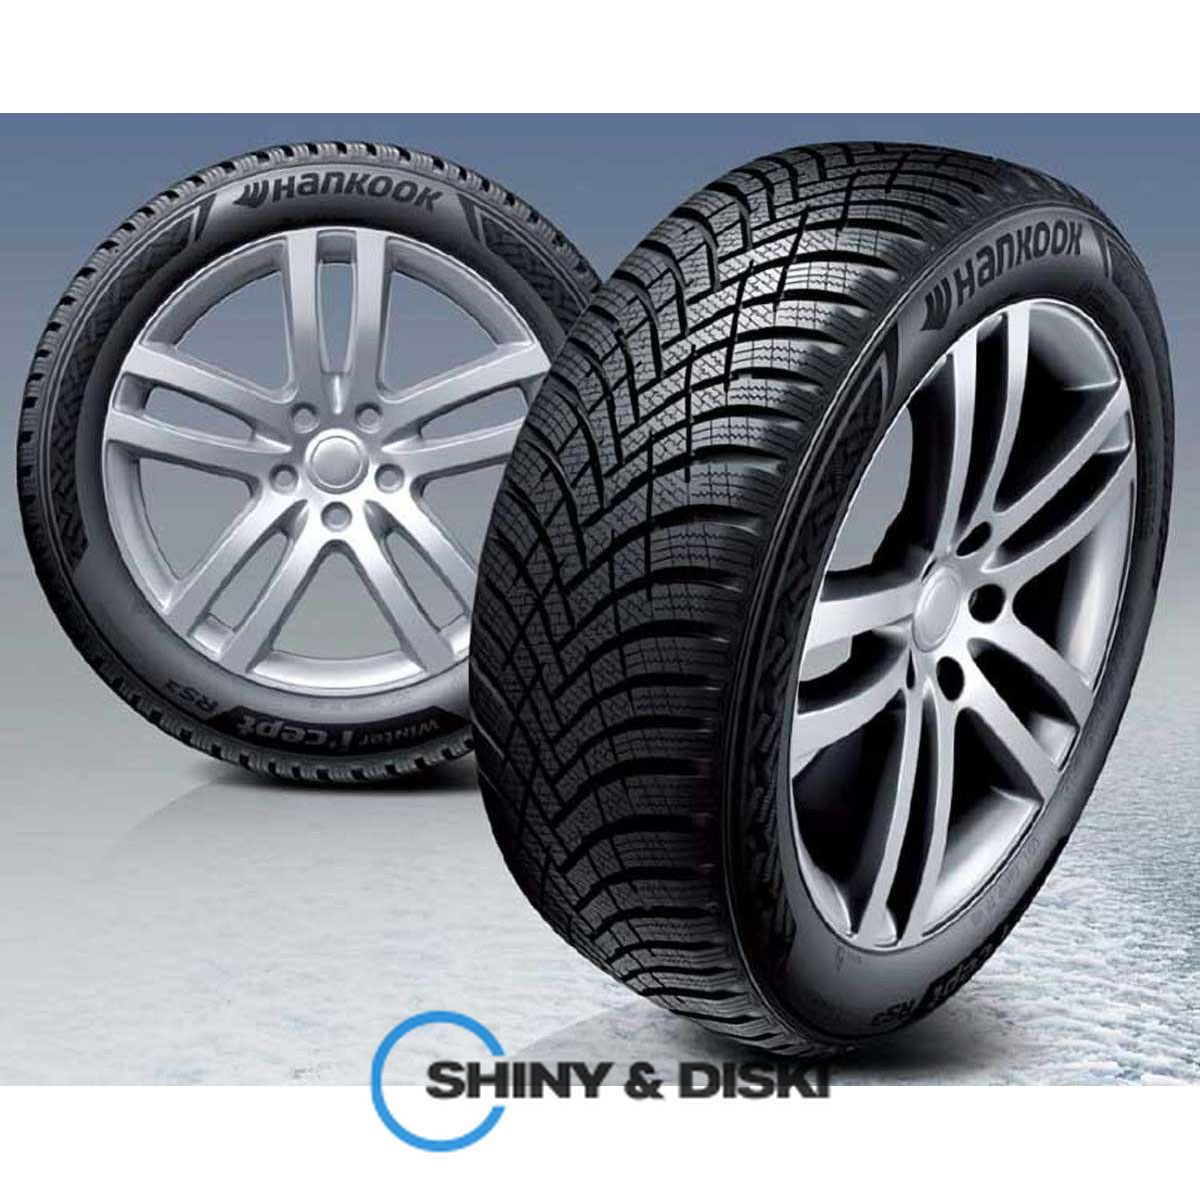 покрышки hankook winter i*cept rs3 w462 205/60 r16 96h